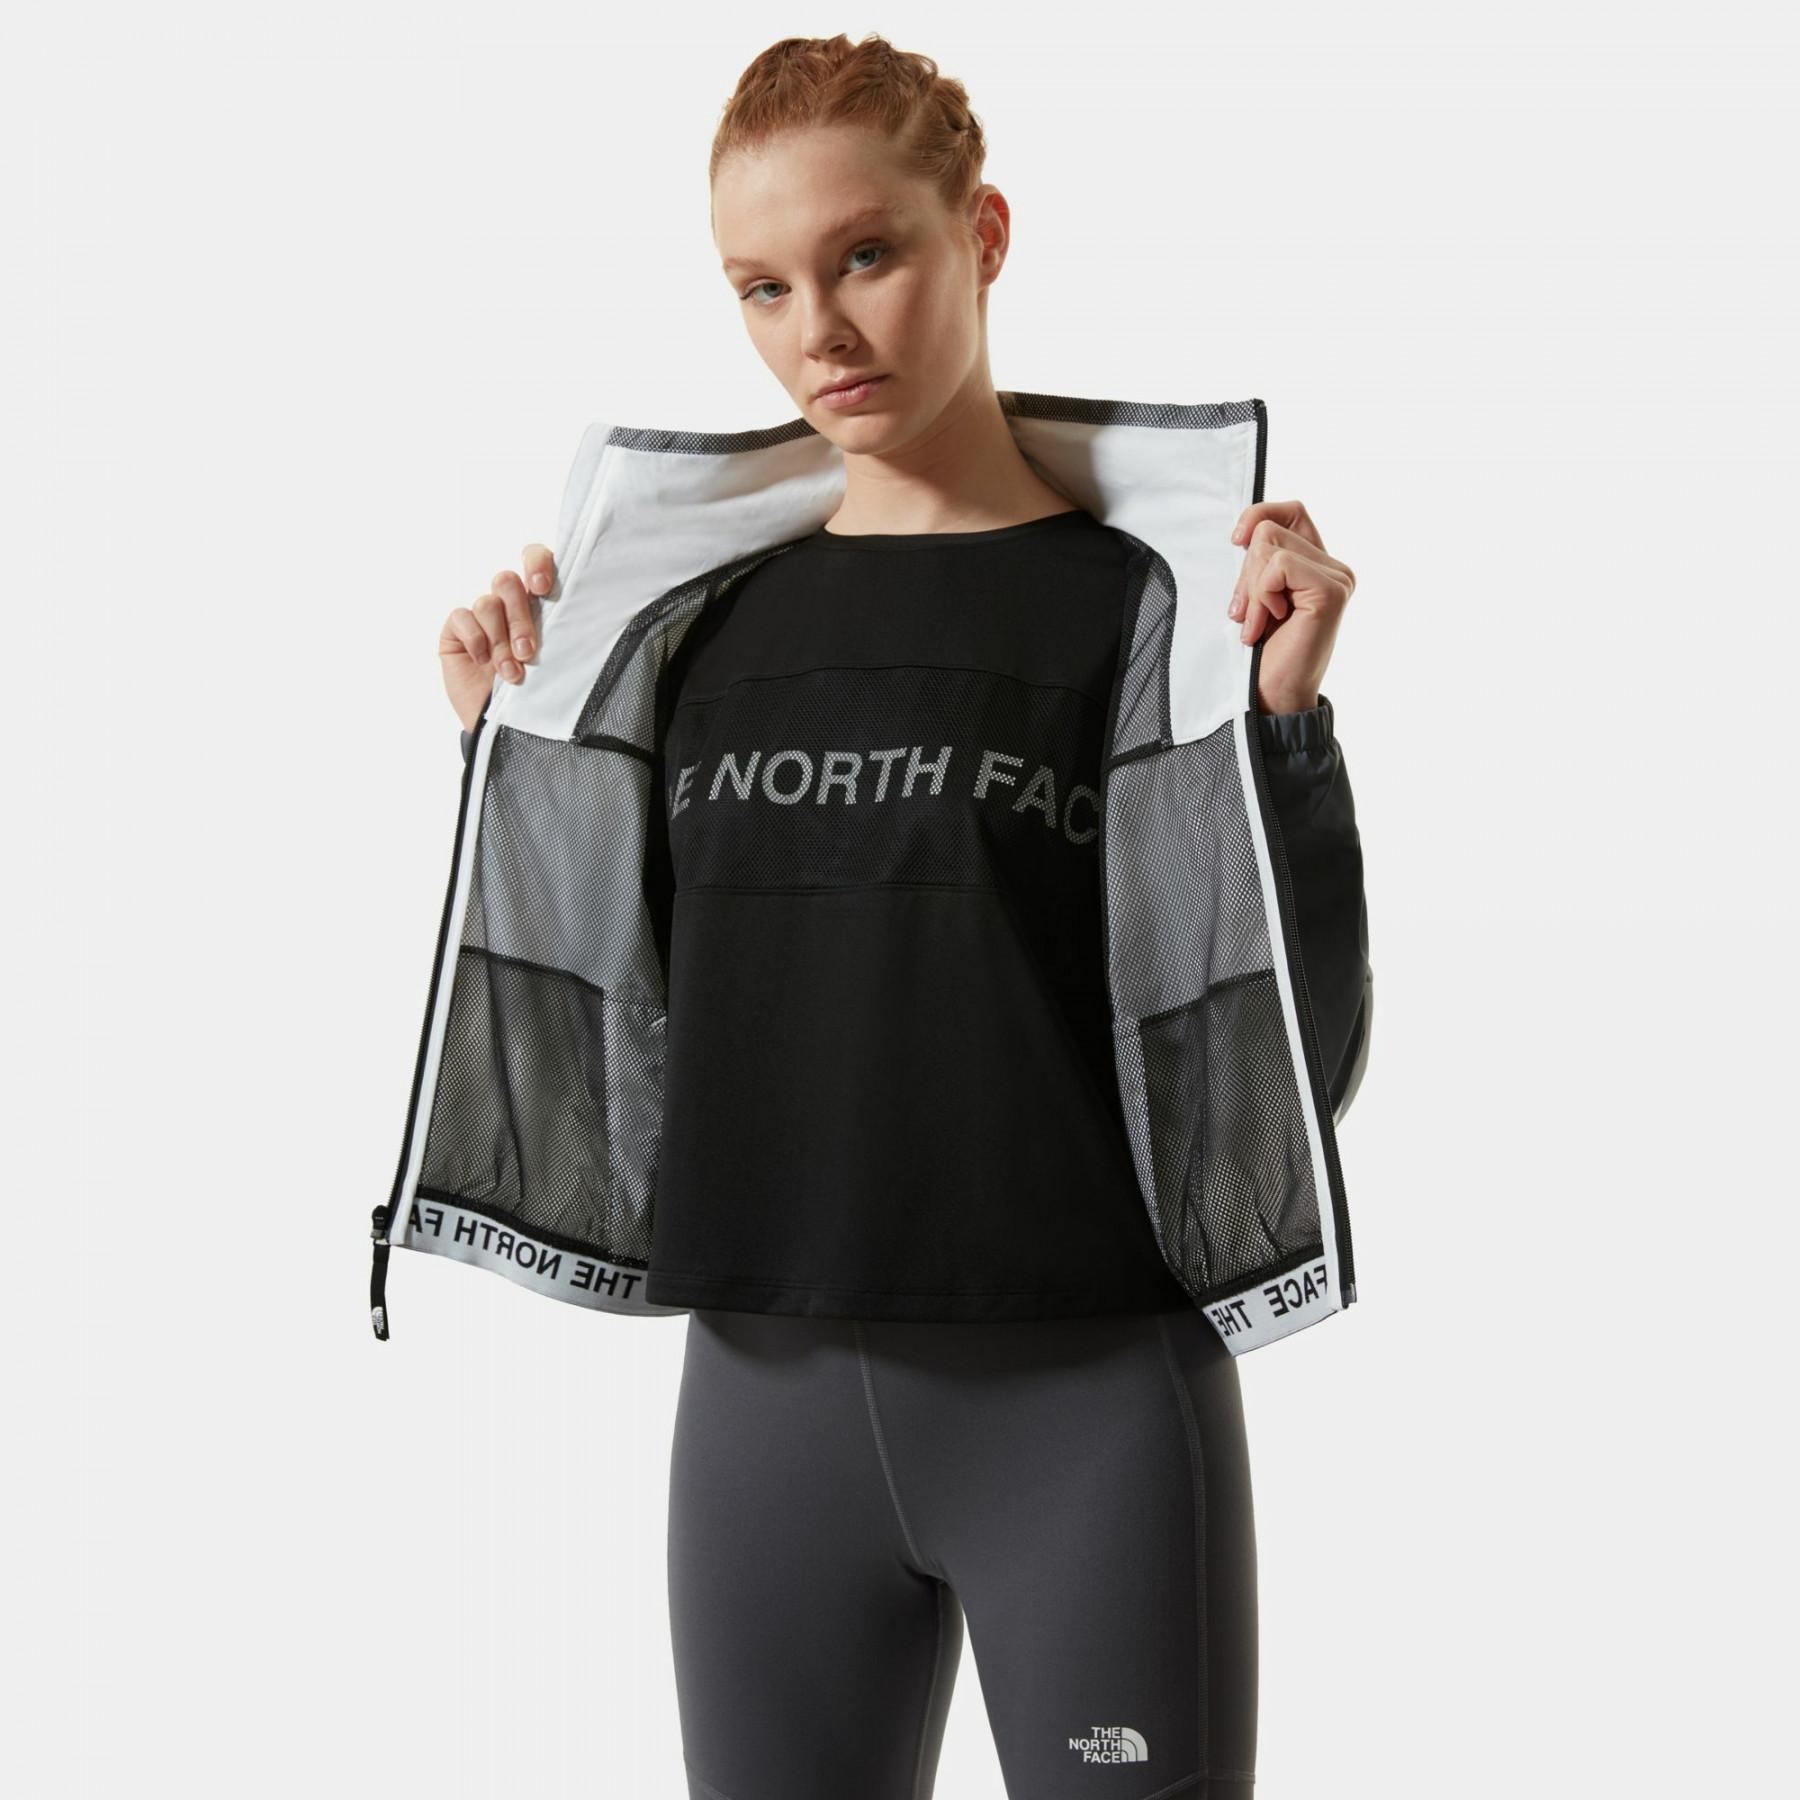 Women's jacket The North Face Wind Mesh